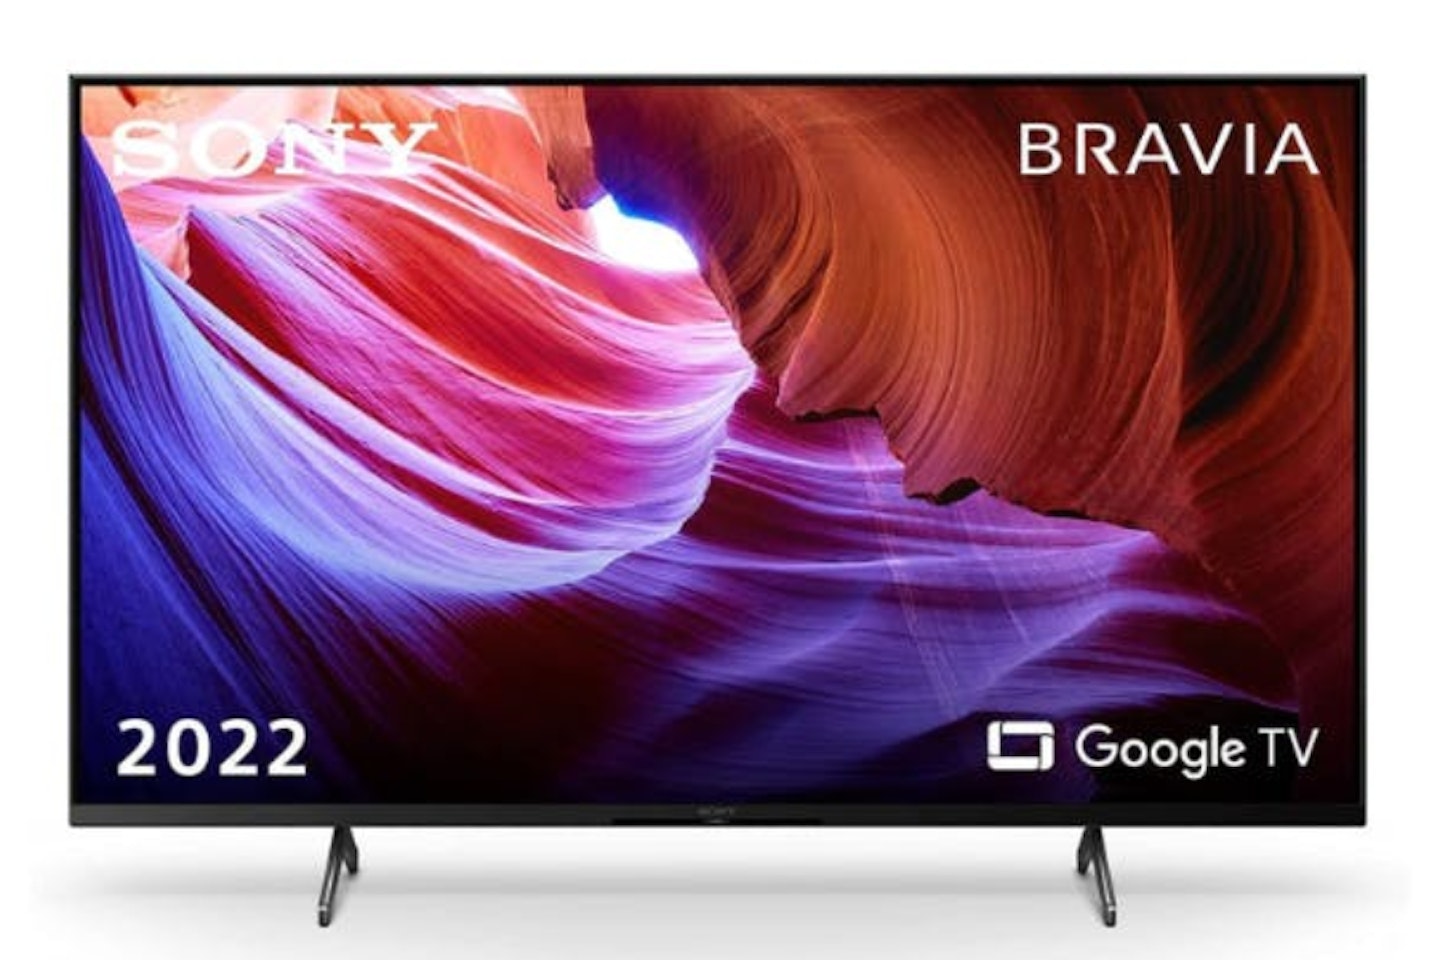 Philips 43PUS8108 (2023) LED HDR 4K Ultra HD Smart TV, 43 inch with  Freeview Play, Ambilight